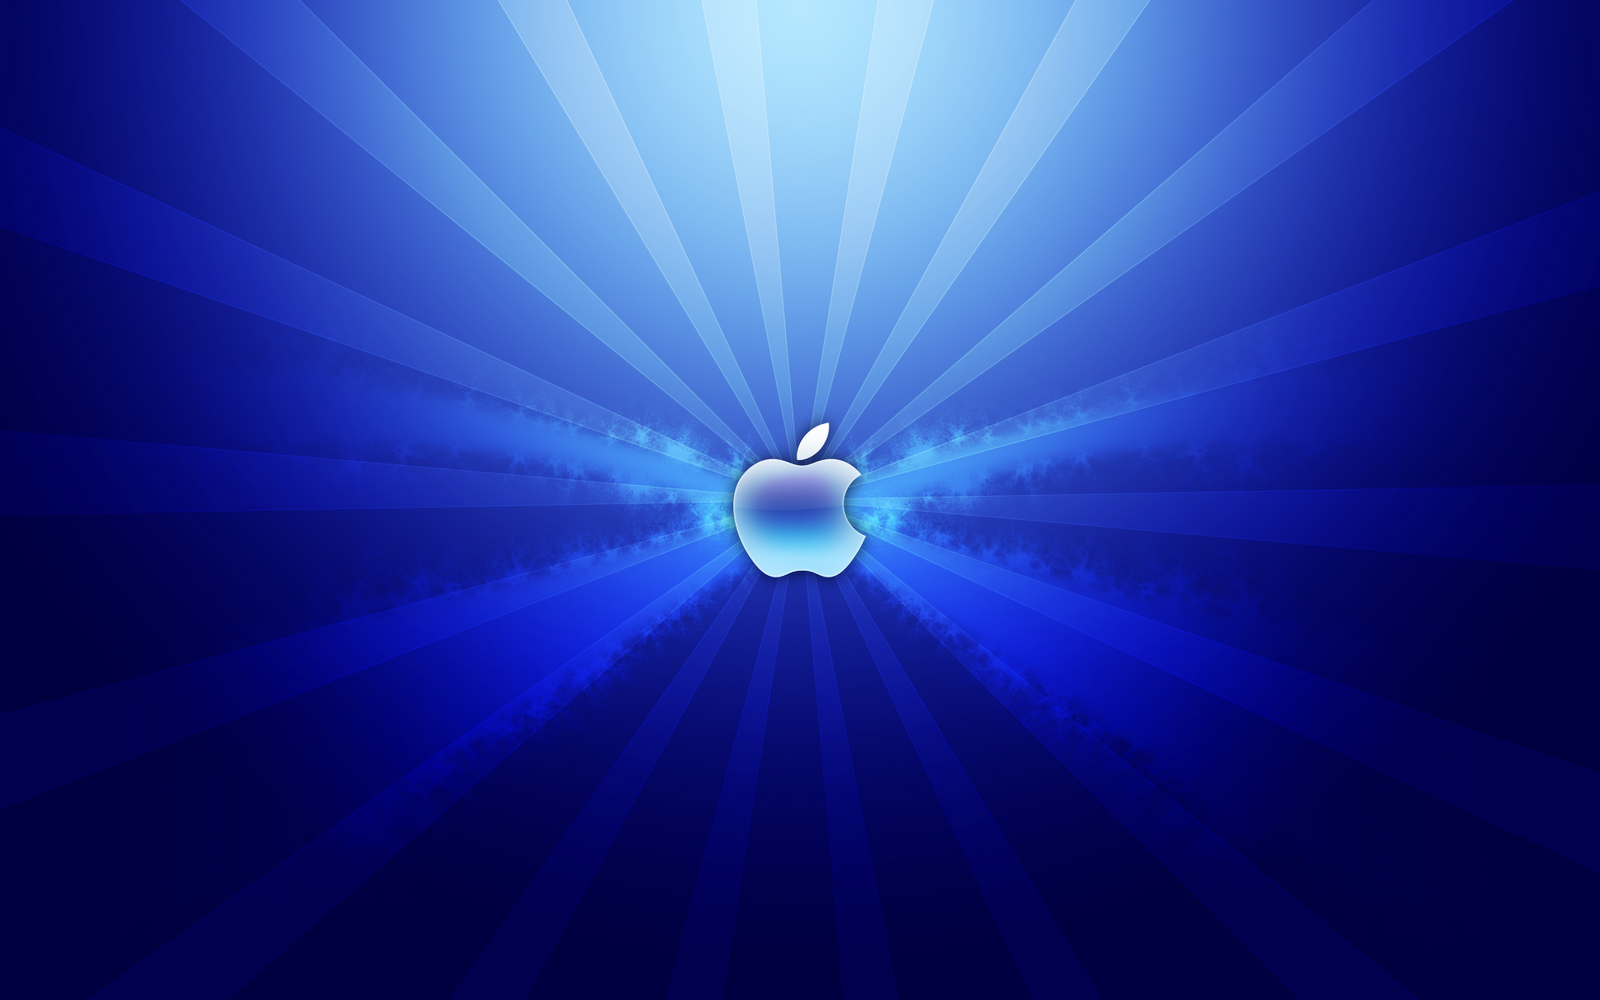  Blue Apple Laptop Wallpaper on this Cool Laptop Wallpapers website